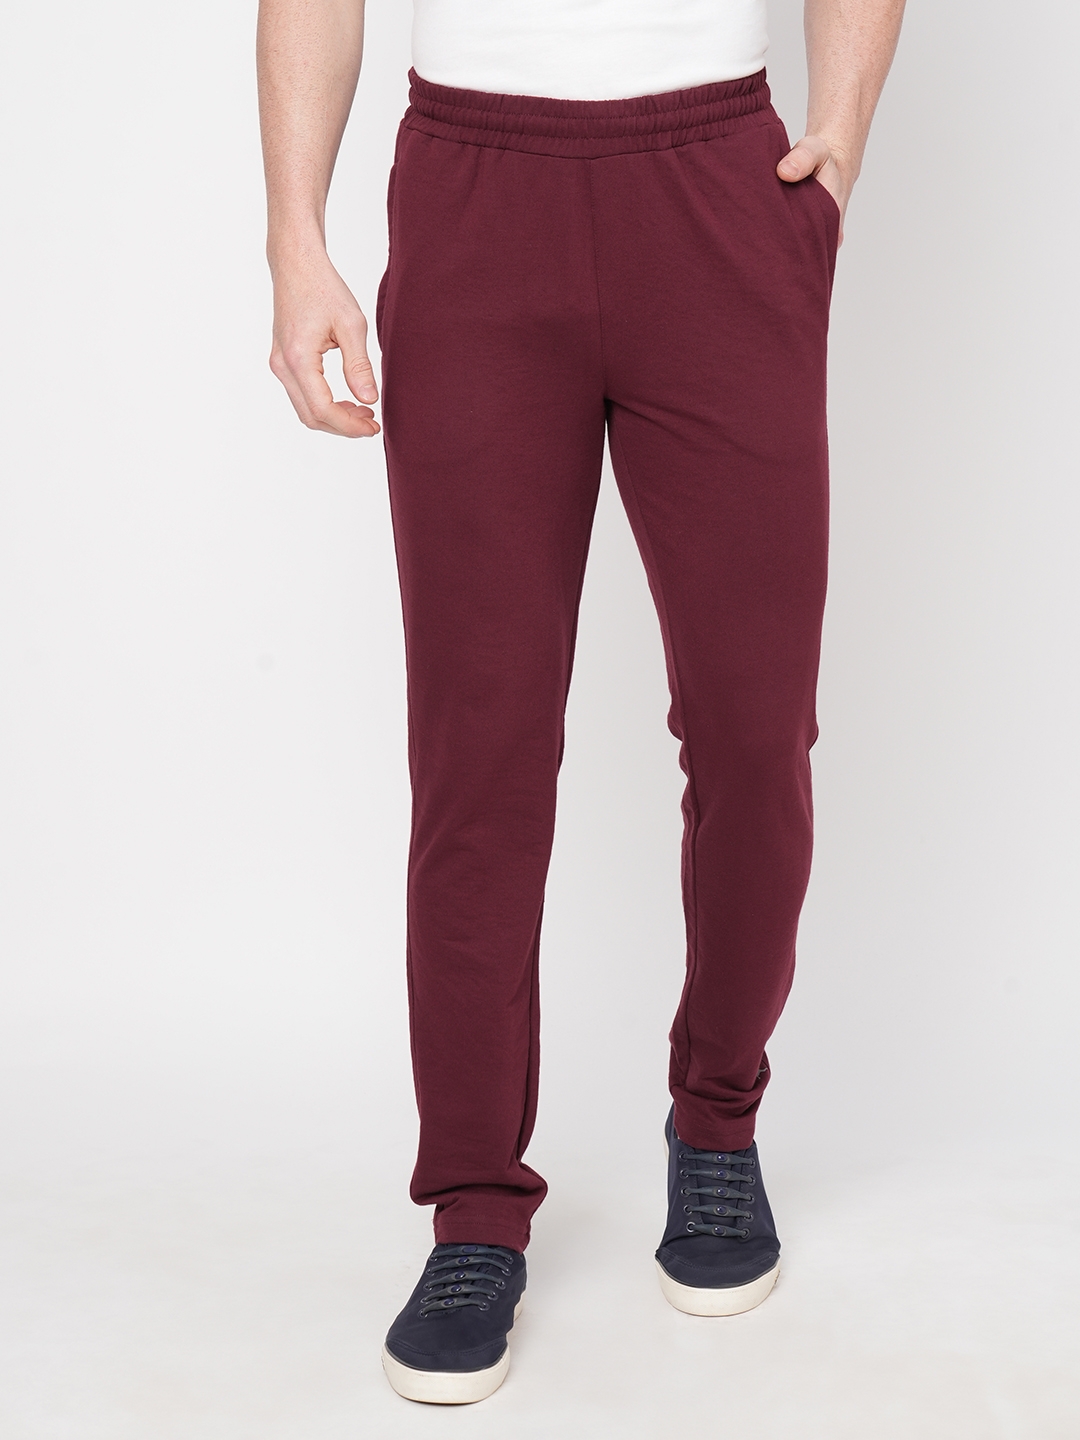 FITZ | Men's Slim Fit Wine Red Cotton Blend Casual Joogers